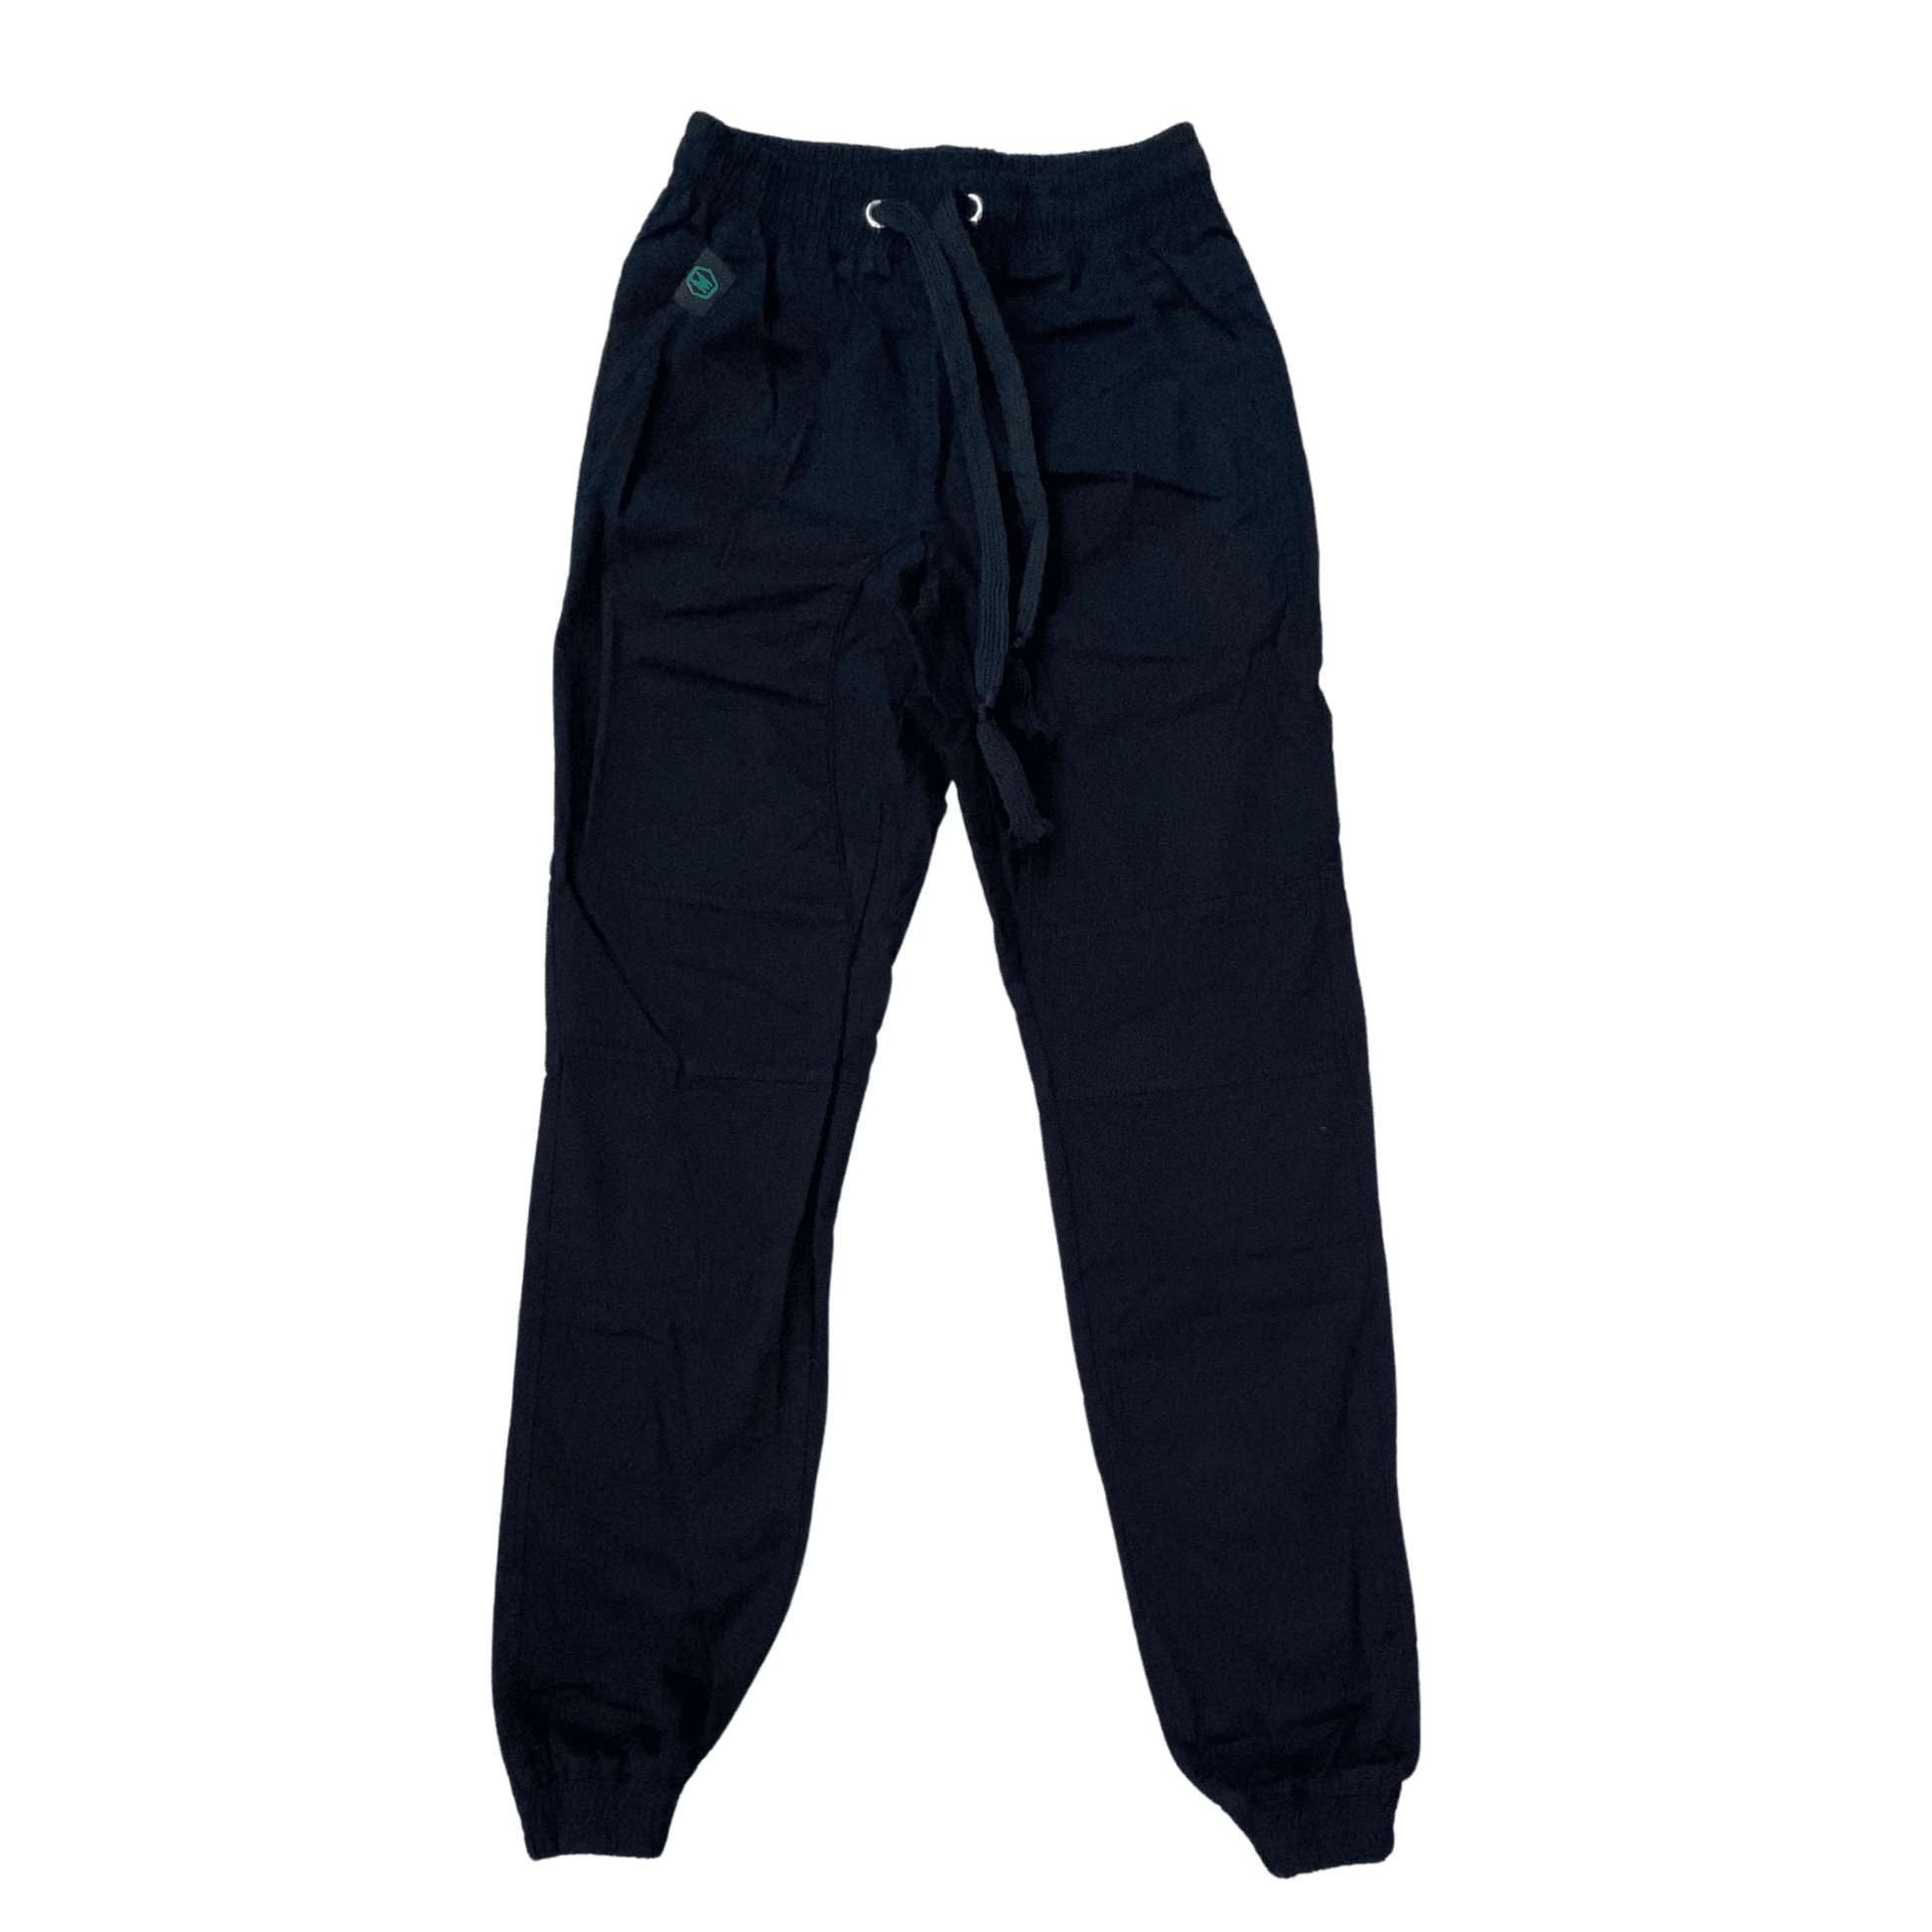 These black joggers are perfect for fall.  They feature elastic at the waist and ankles.